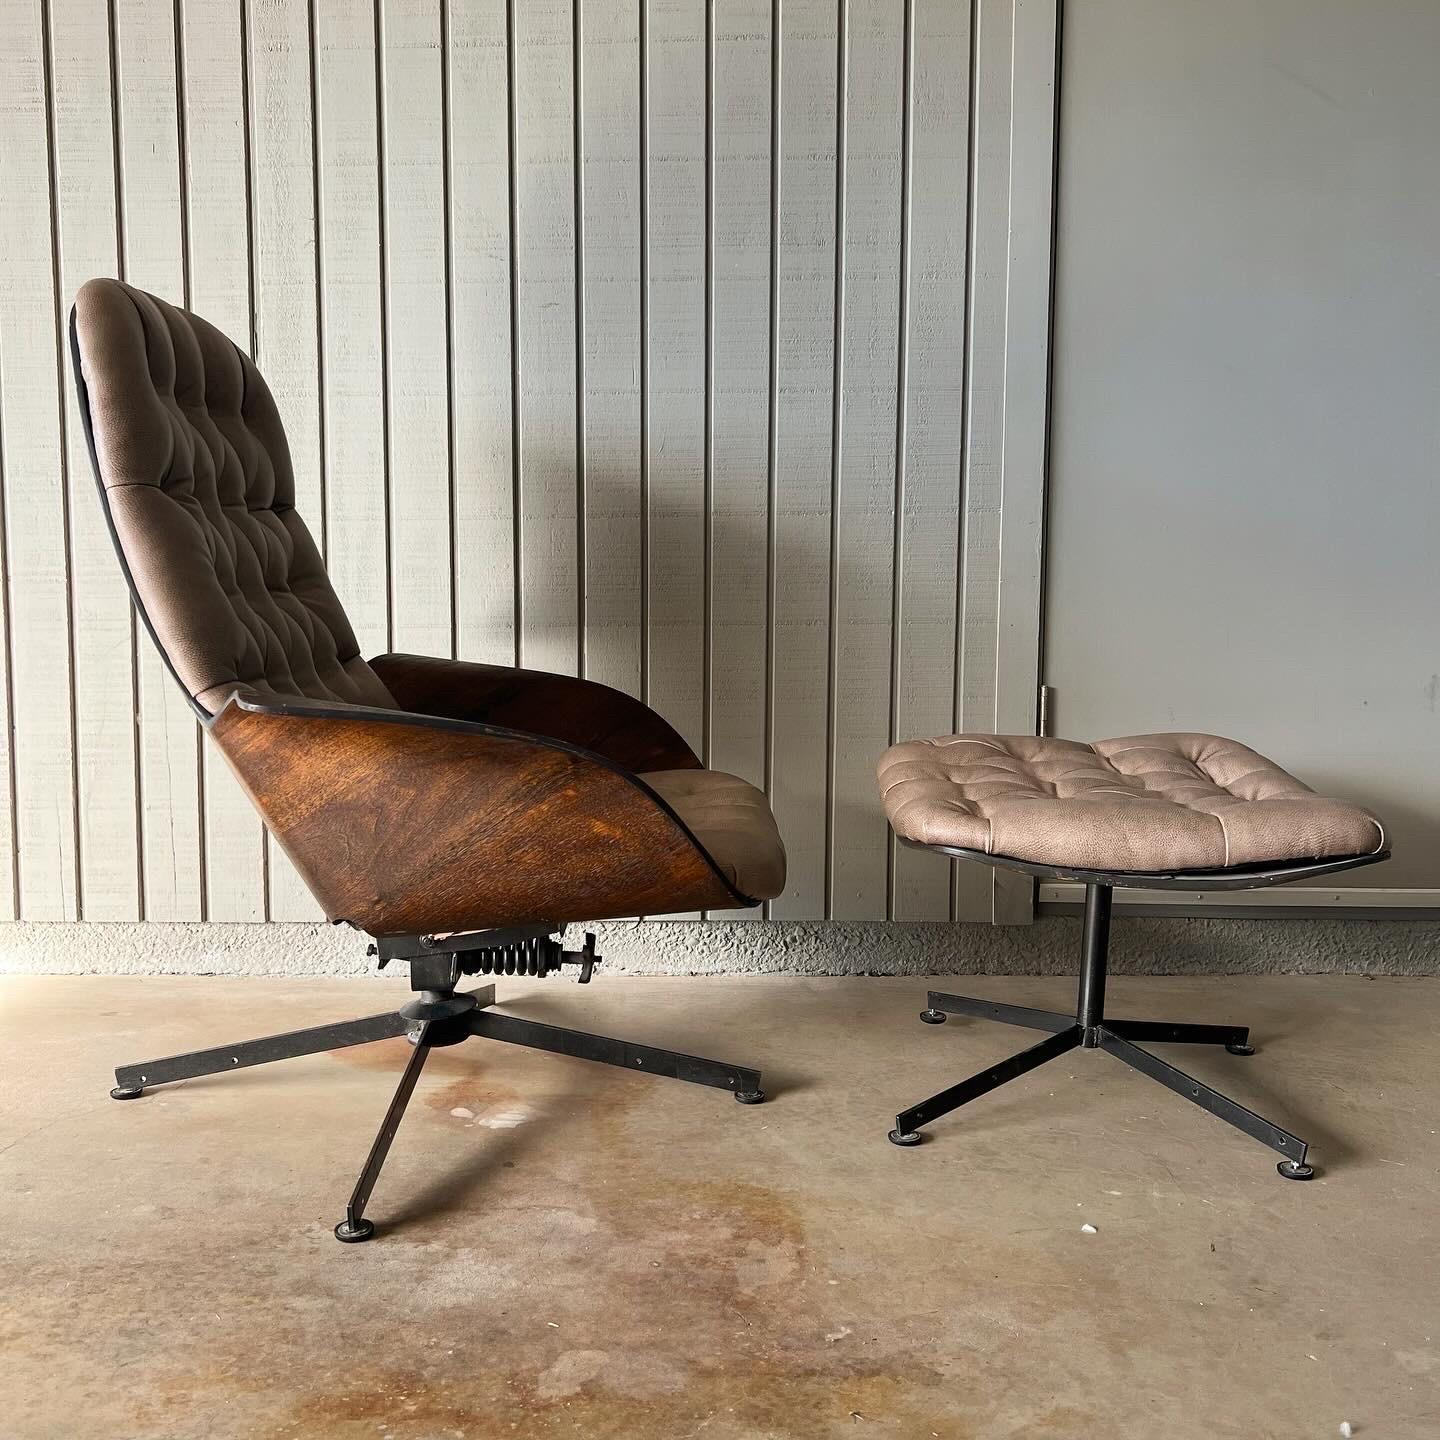 1960s vintage Mr. Chair and ottoman by George Mulhauser for Plycraft. This iconic mid century modern chair features sculptural bent walnut armrests and new textured leather tufted upholstery. The chair and ottoman both swivel. The chair tilts on a